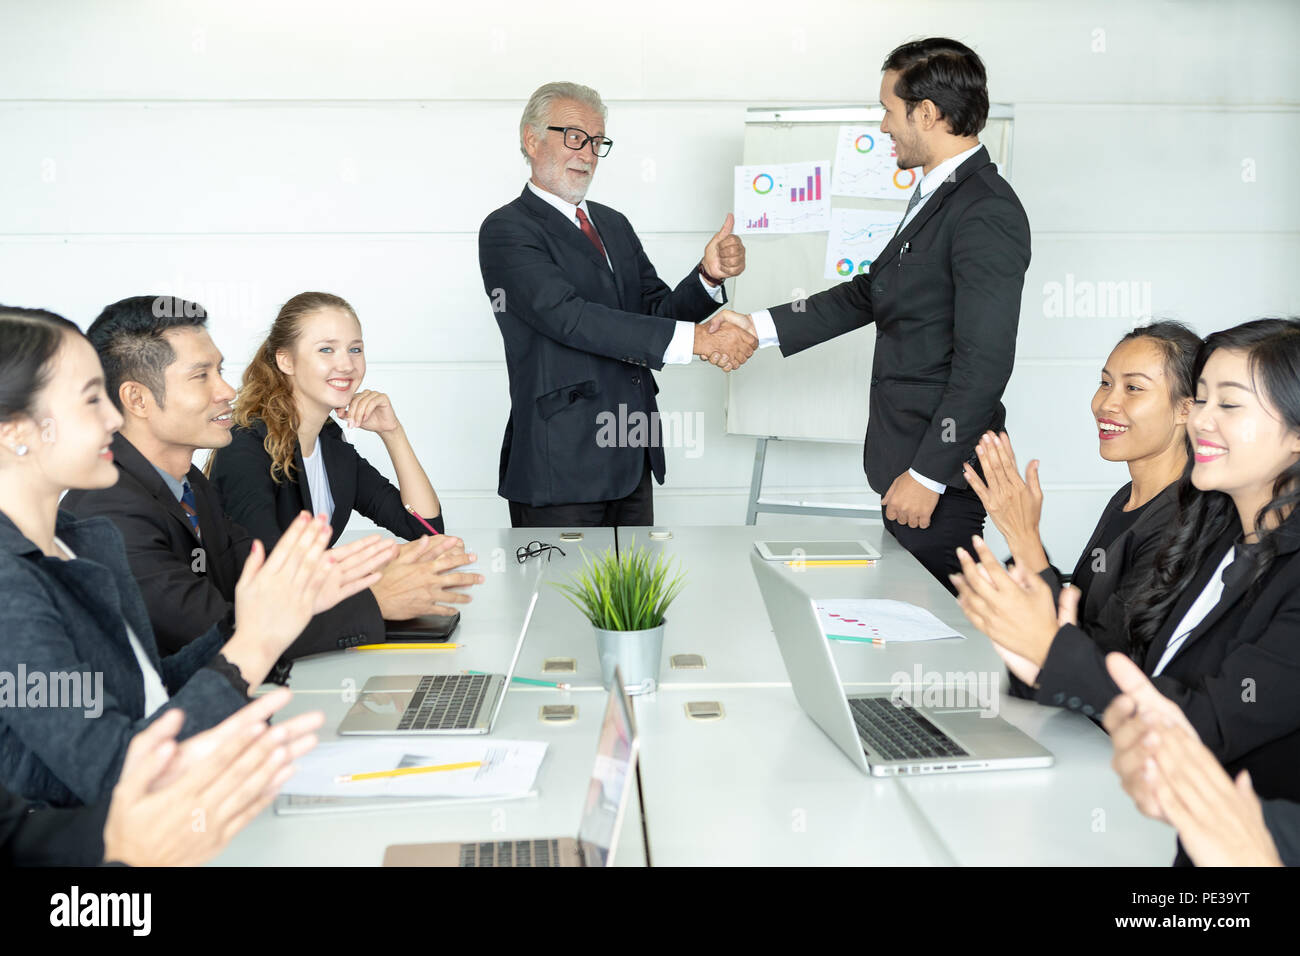 Senior Boss or CEO promoting young subordinate. Two businessmen handshaking, congratulating on promotion. Celebration of promotional event. Stock Photo